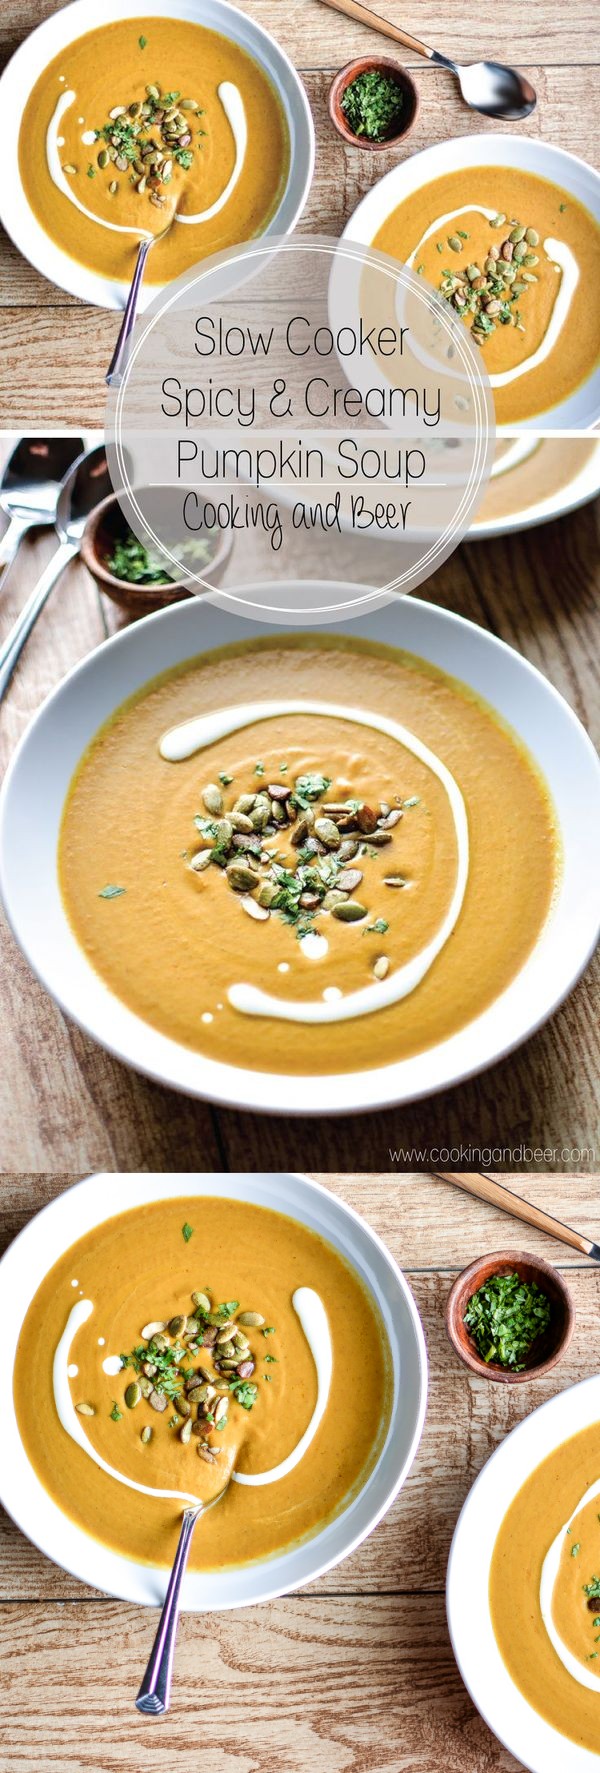 Slow Cooker Spicy and Creamy Pumpkin Soup